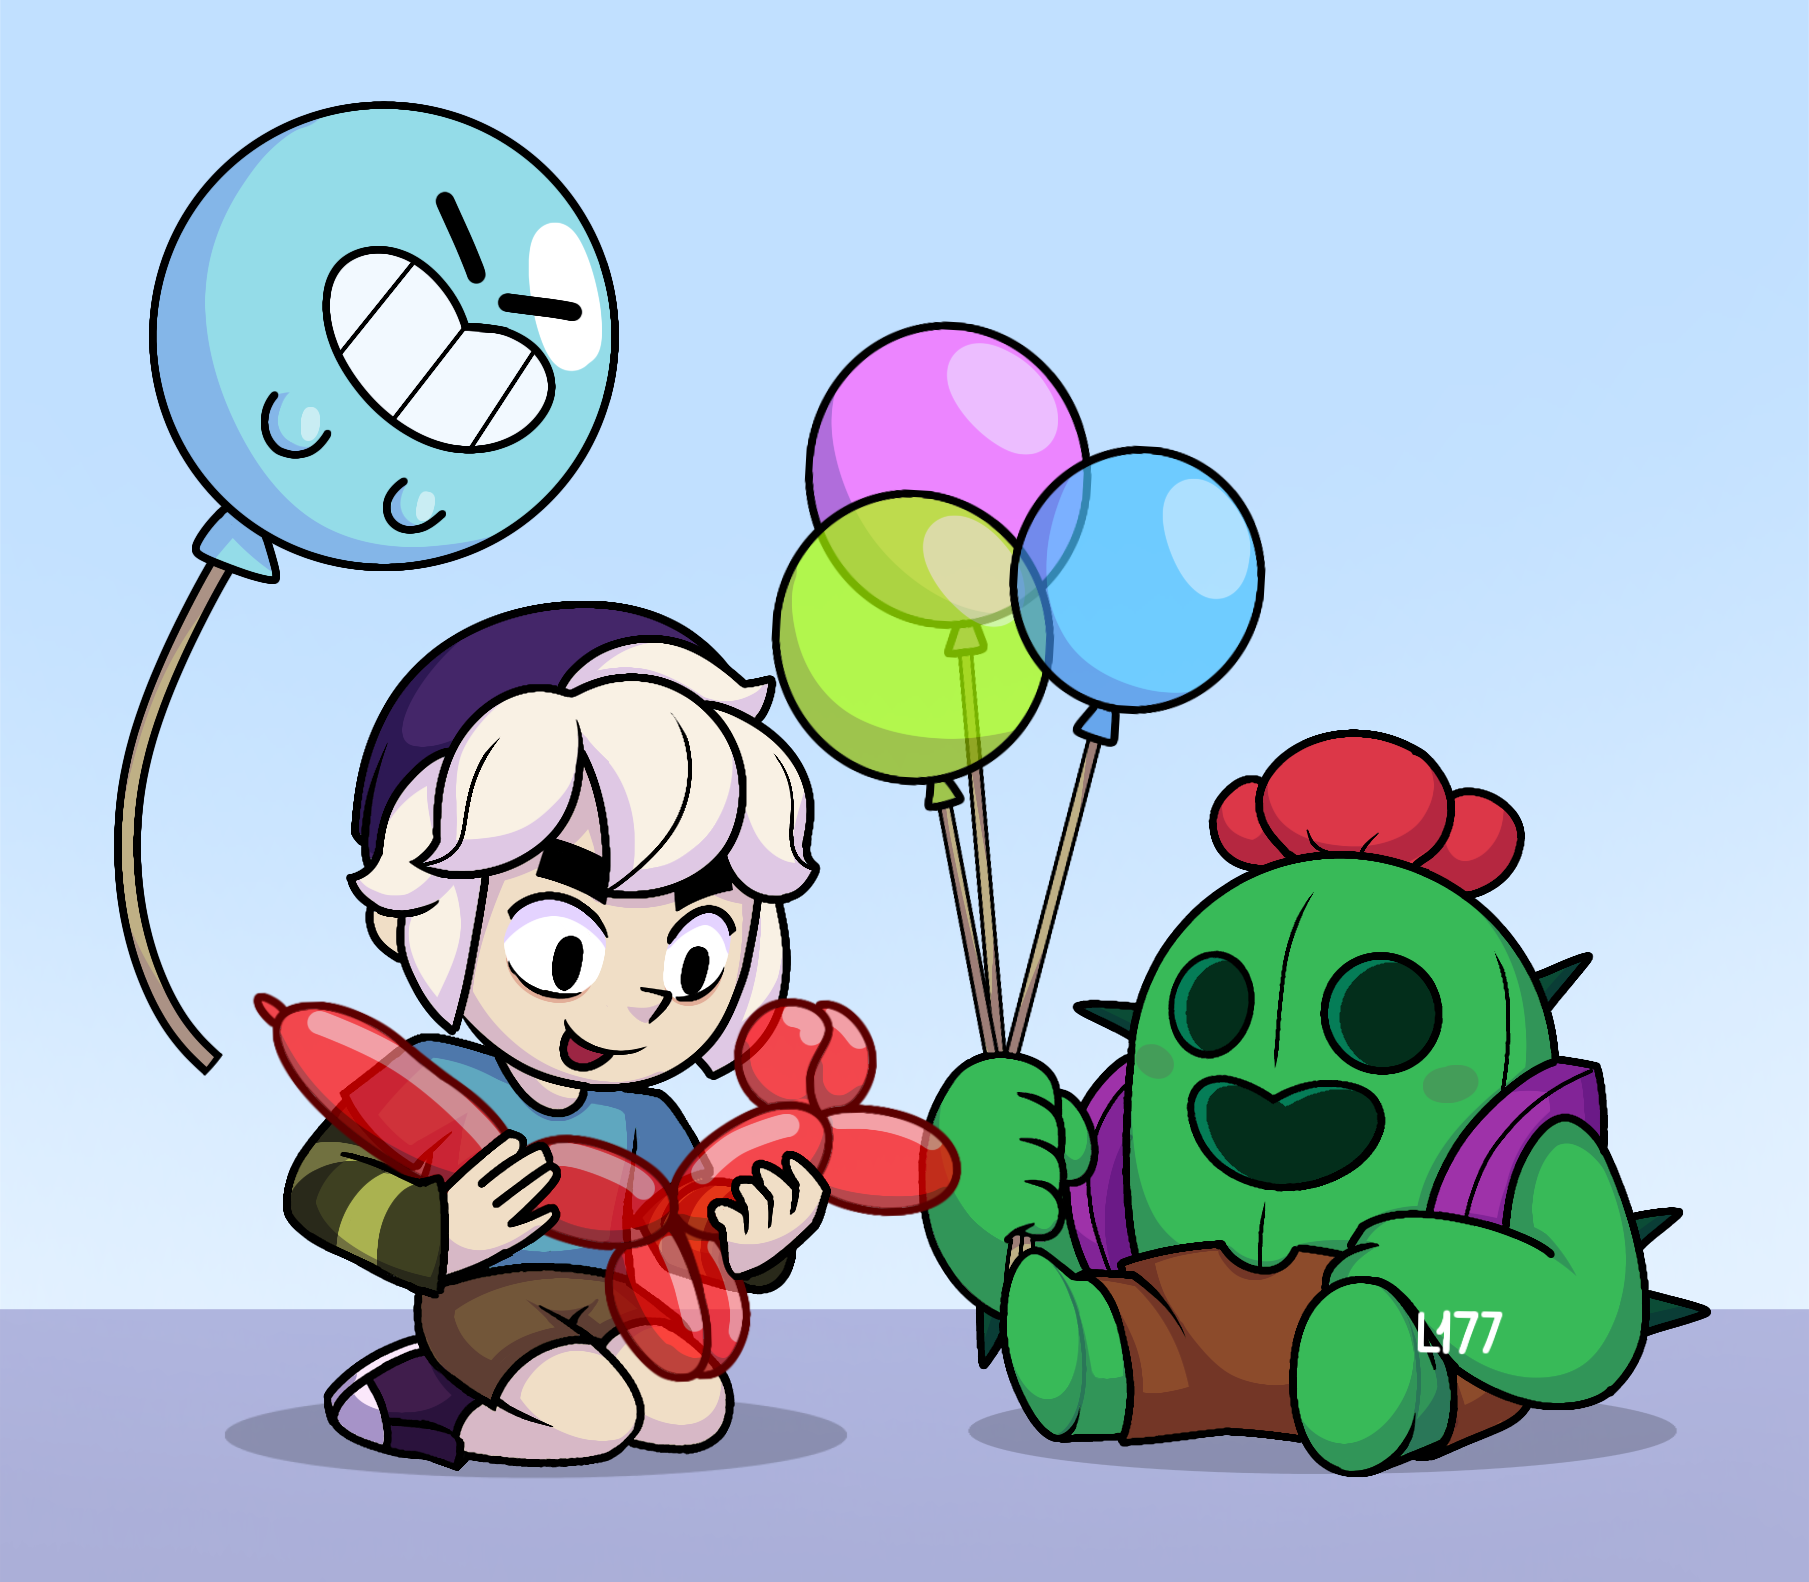 Gus and Spike playing with balloons